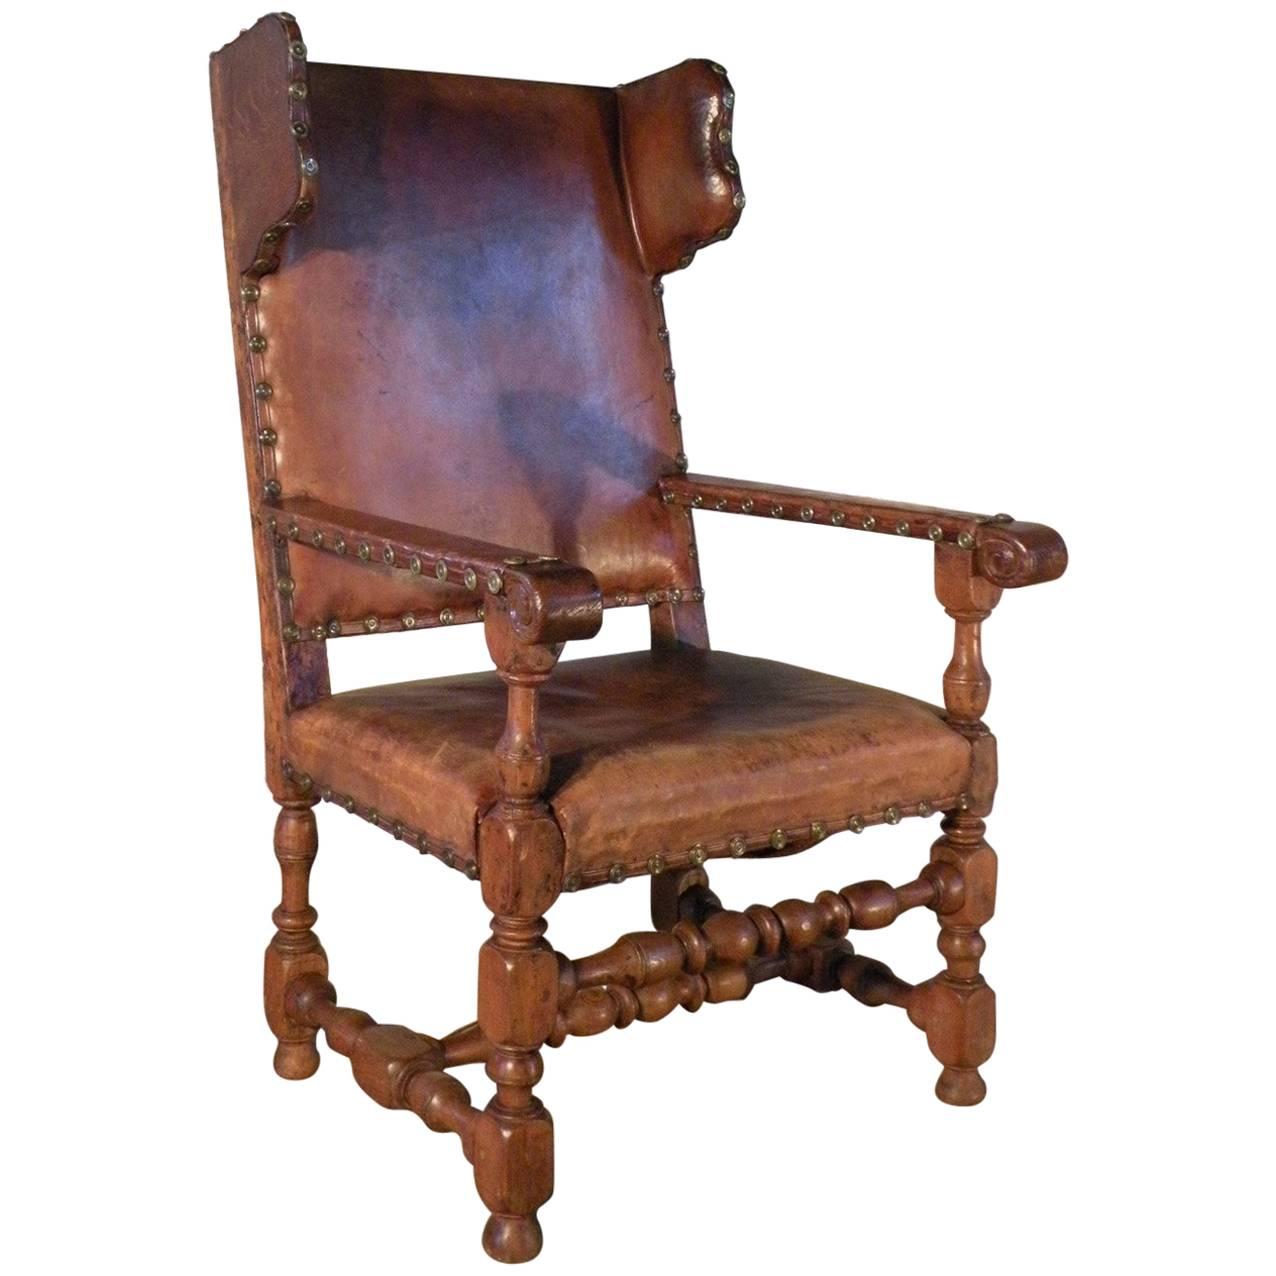 Swedish Baroque 17th Century Leather-Covered Wing Back Armchair For Sale